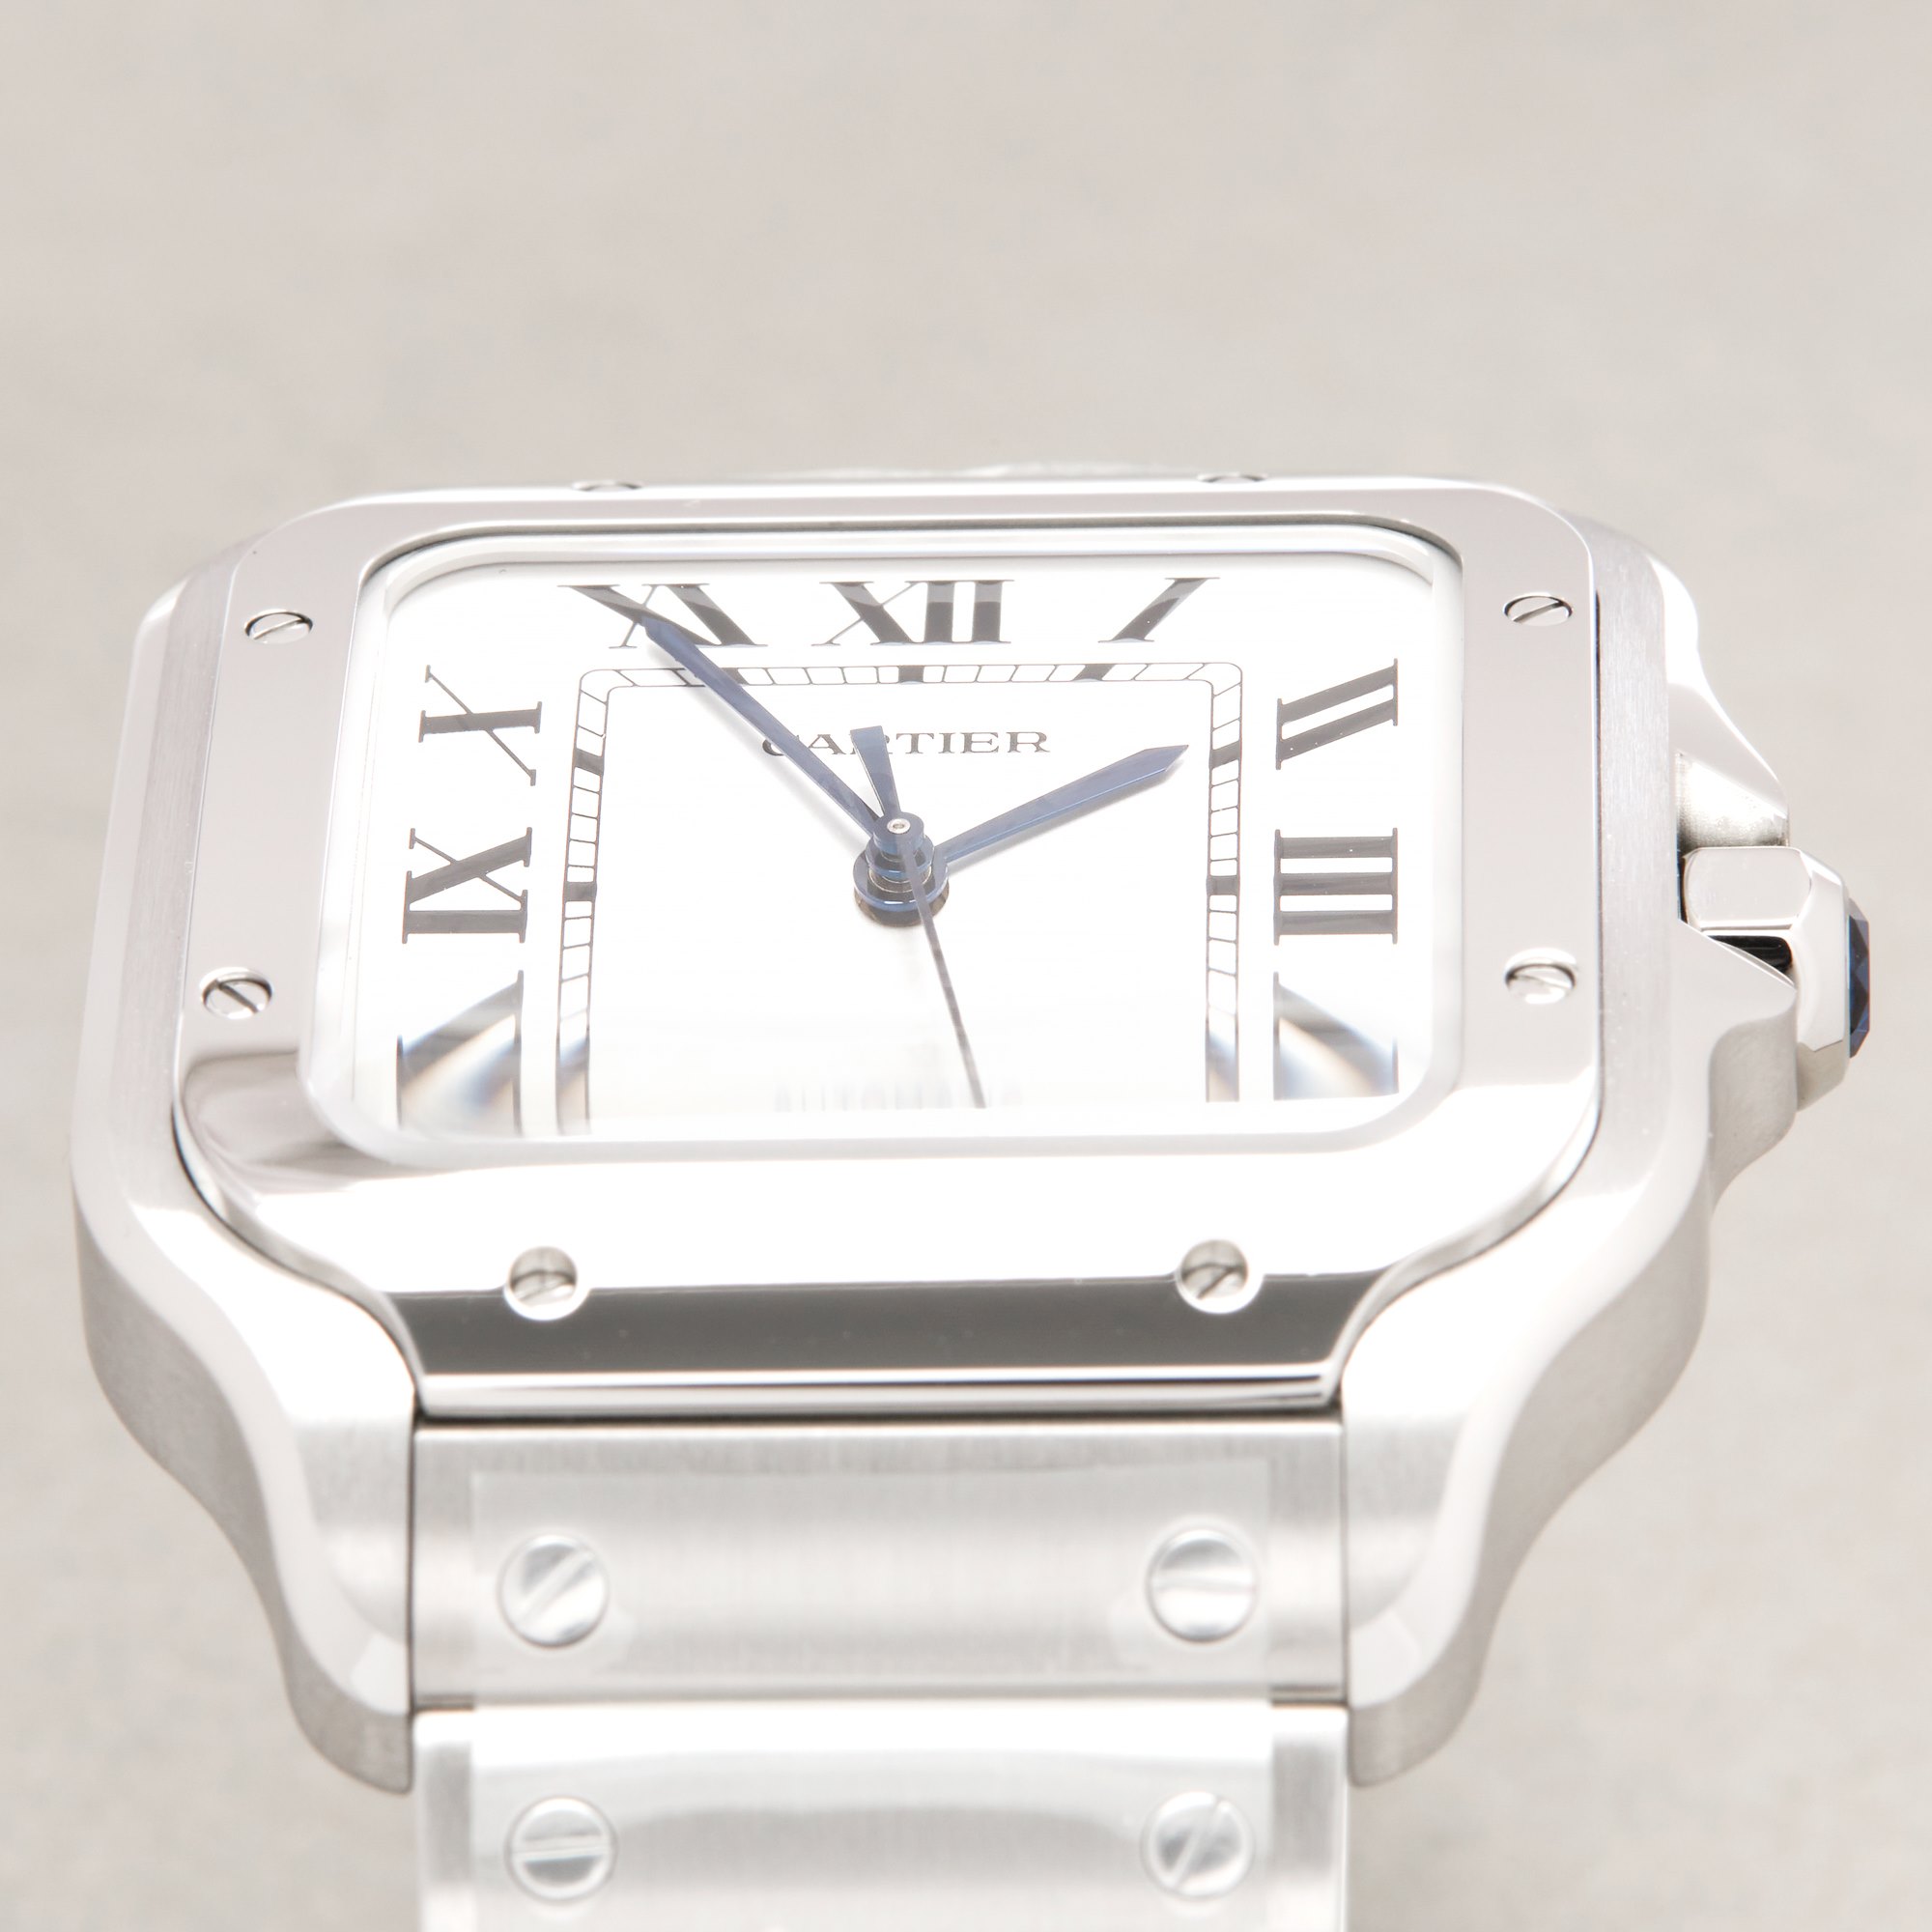 Cartier Santos Large Roestvrij Staal WSSA0018 or 4072